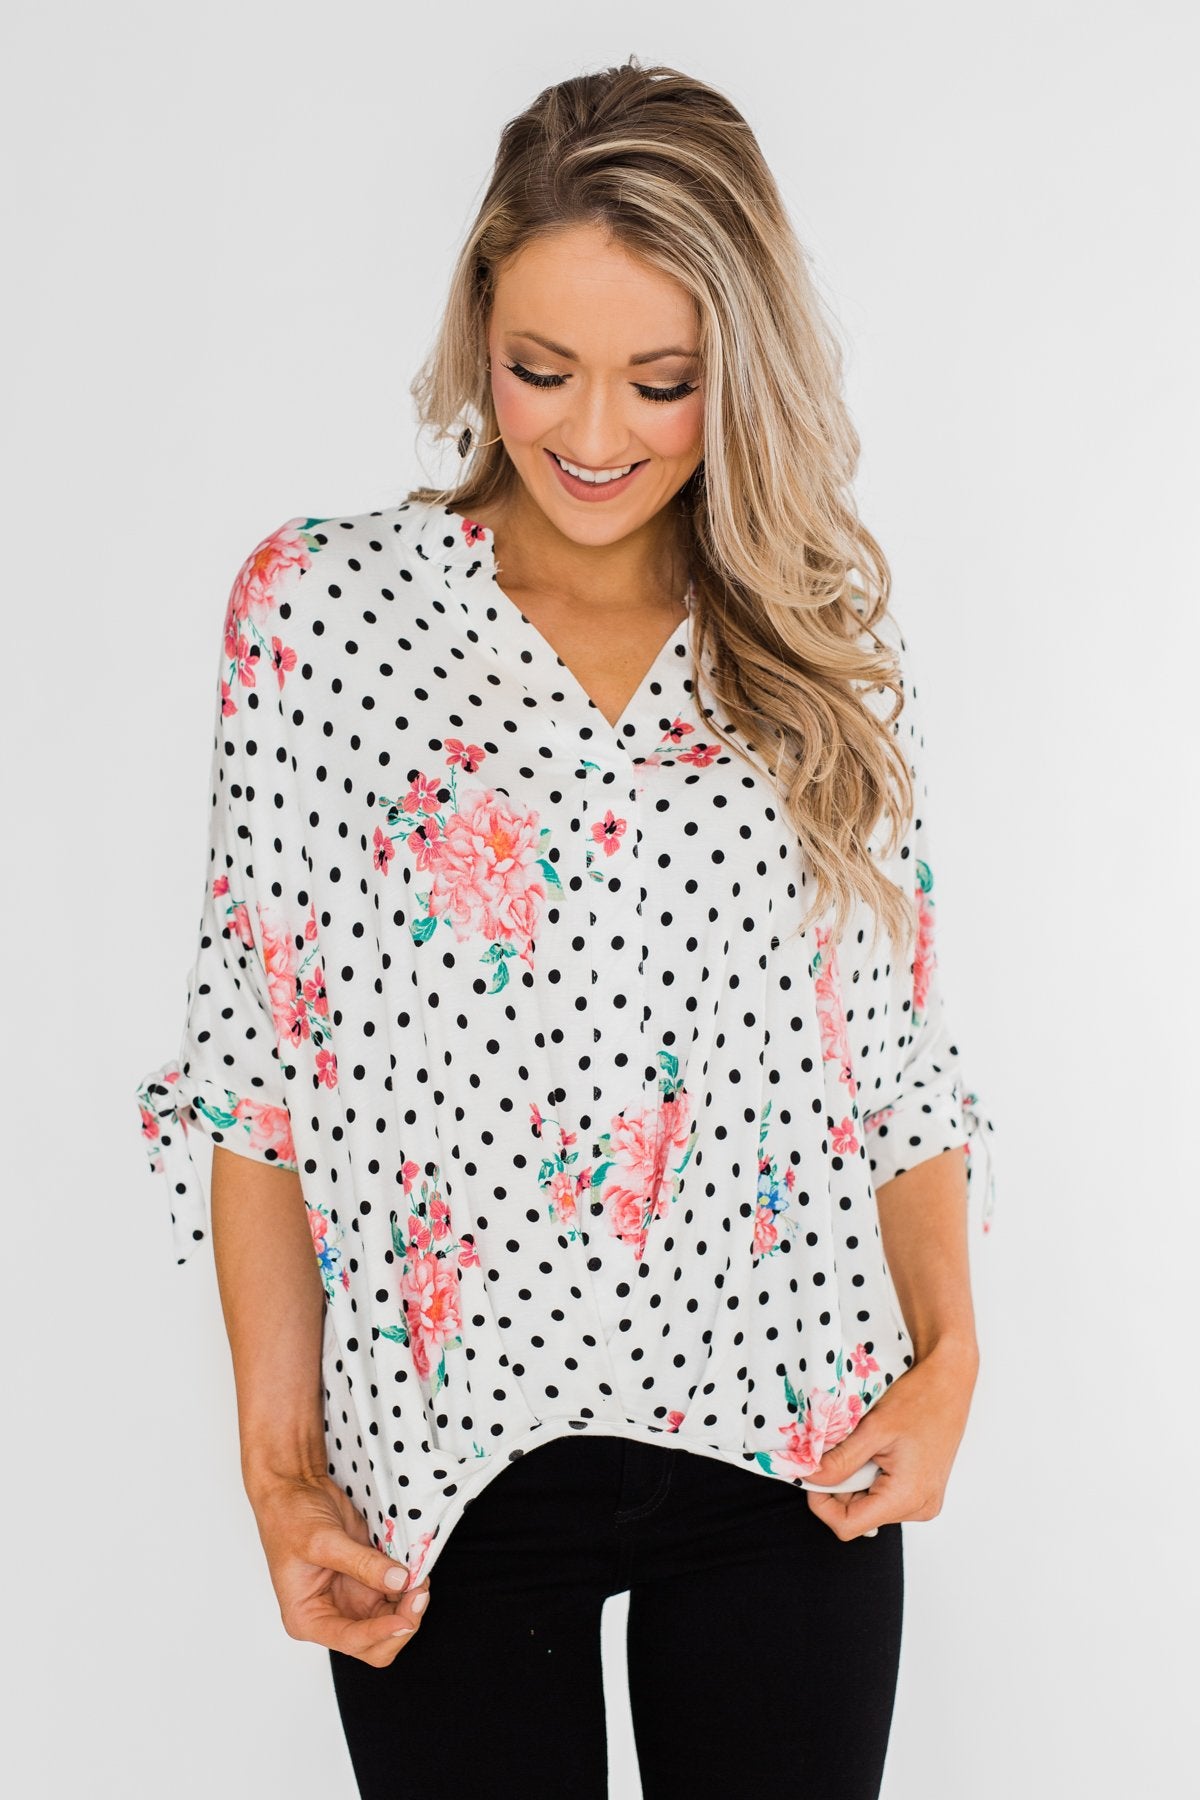 Show You Off Polka Dot & Floral Top- Ivory